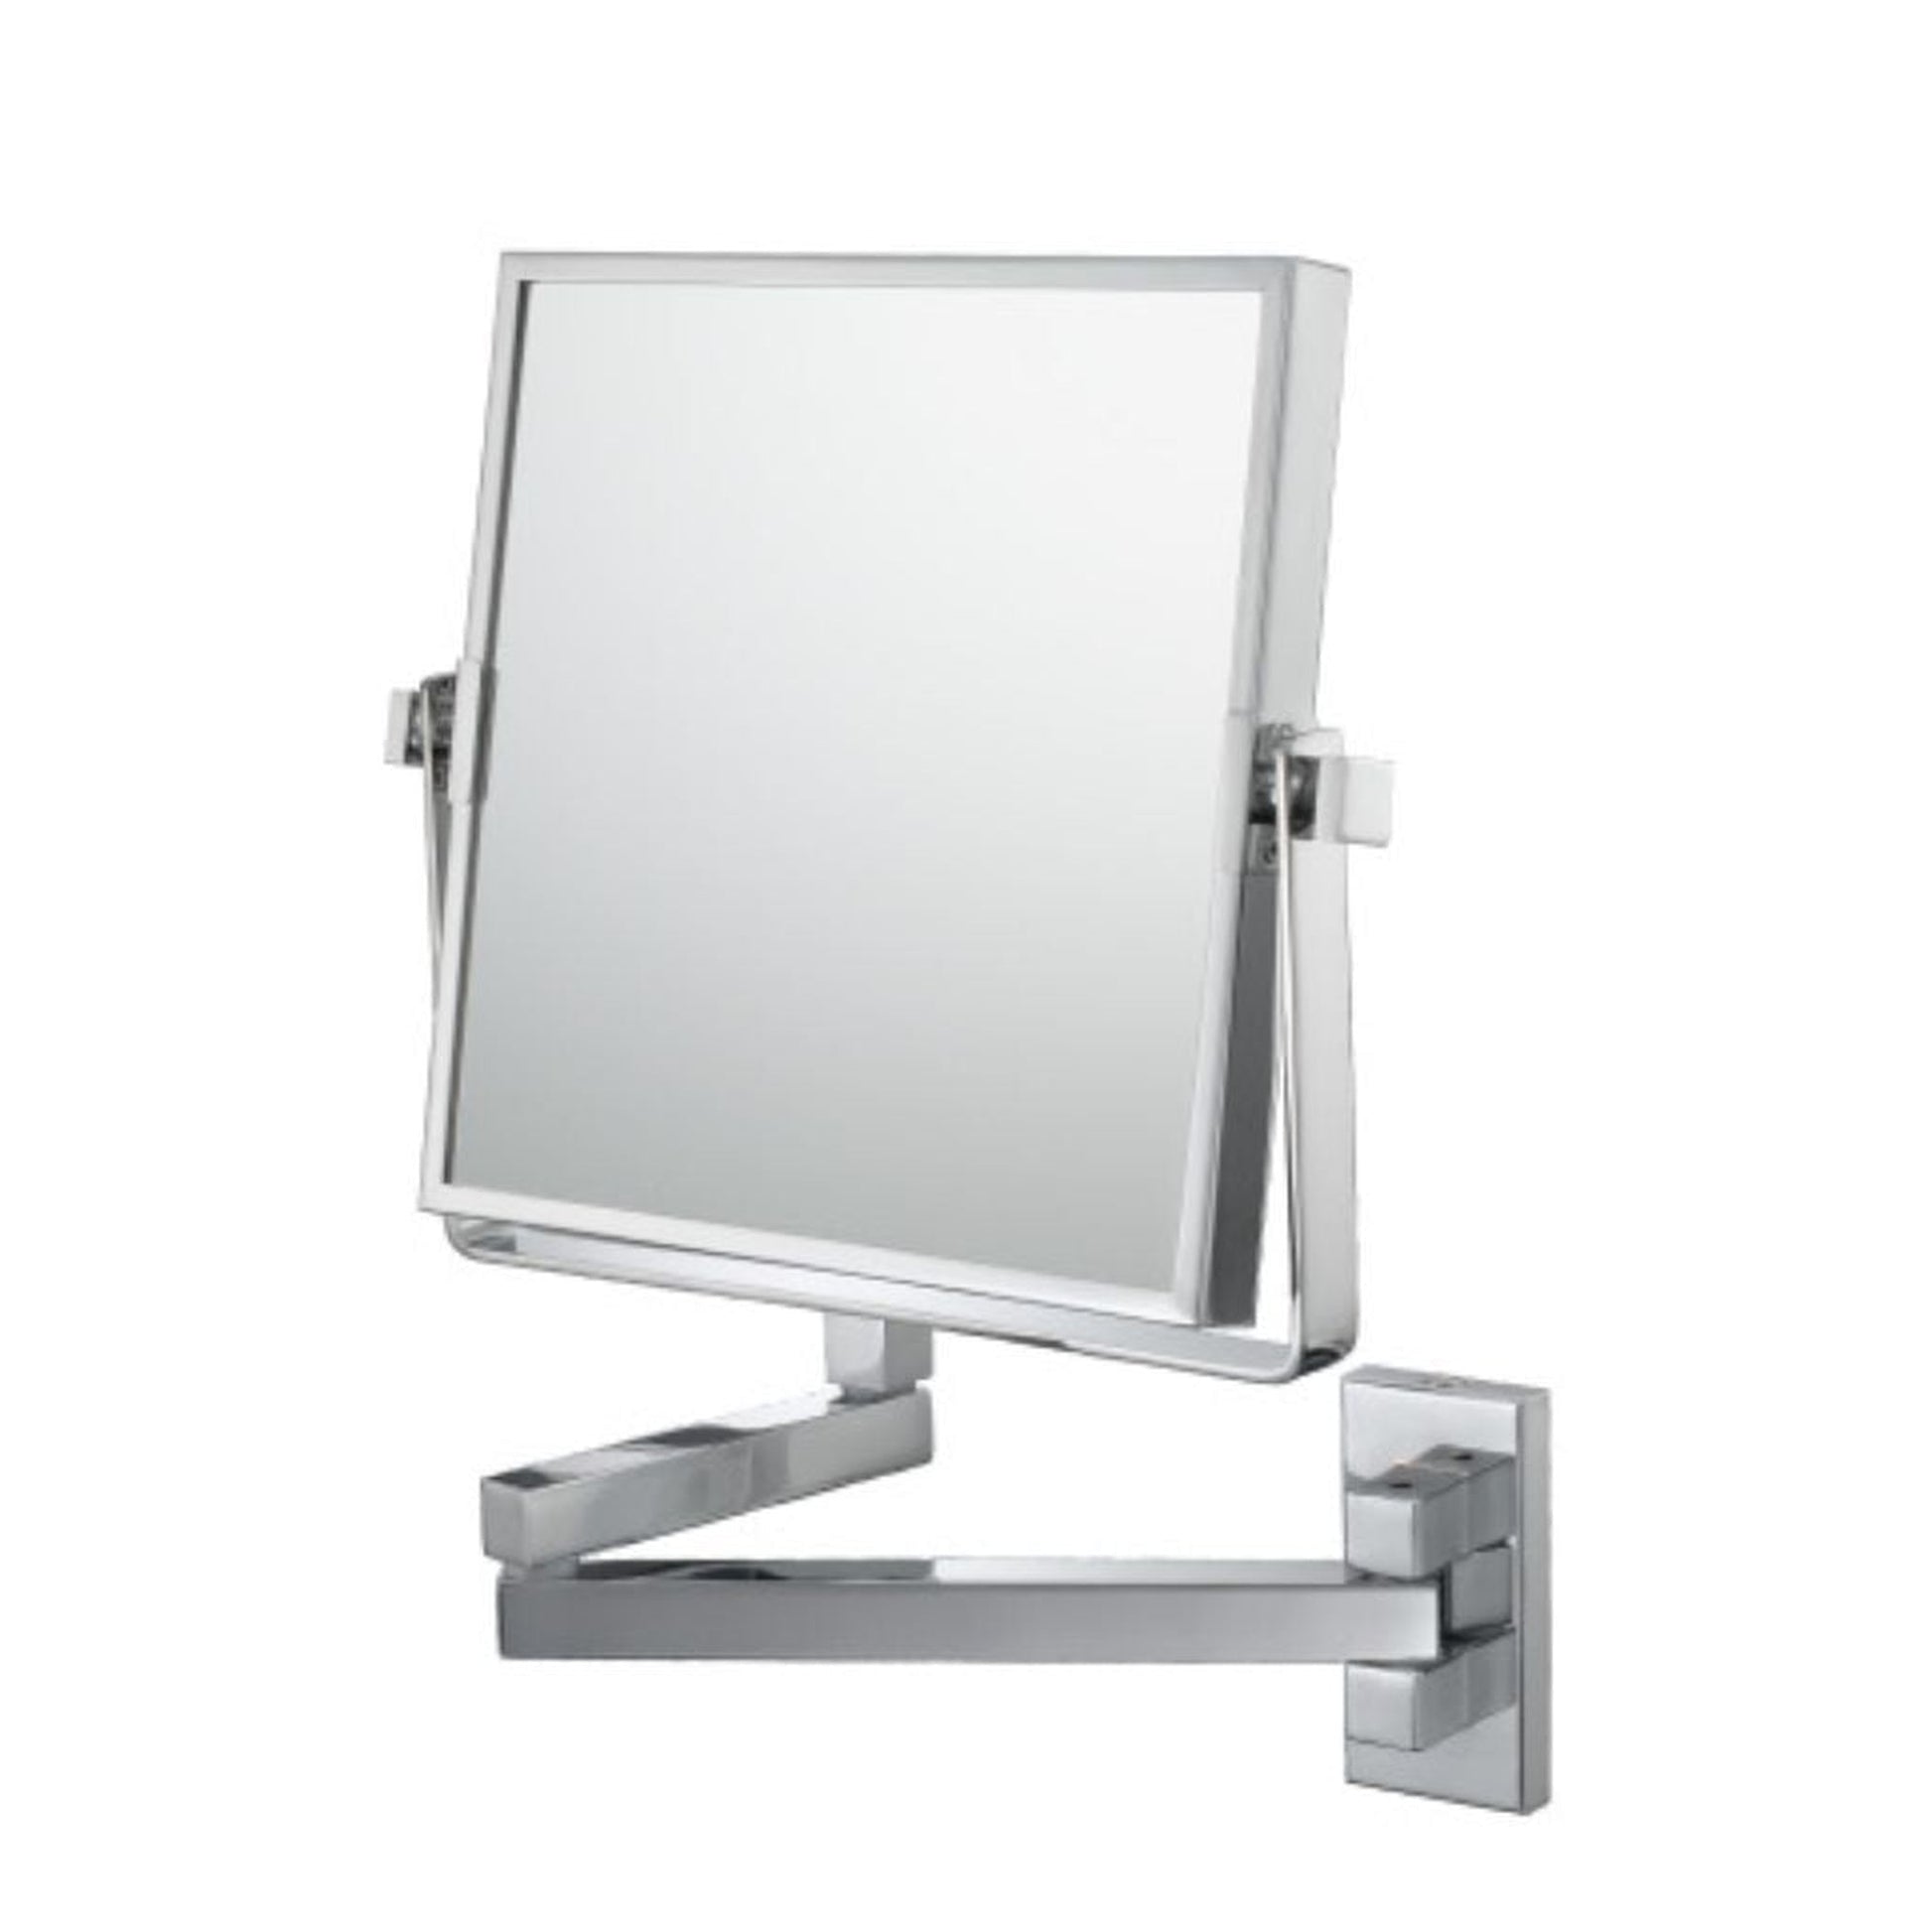 Aptations Mirror Image 9" x 12" Chrome Wall-Mounted Square 1X/3X Magnified Makeup Mirror